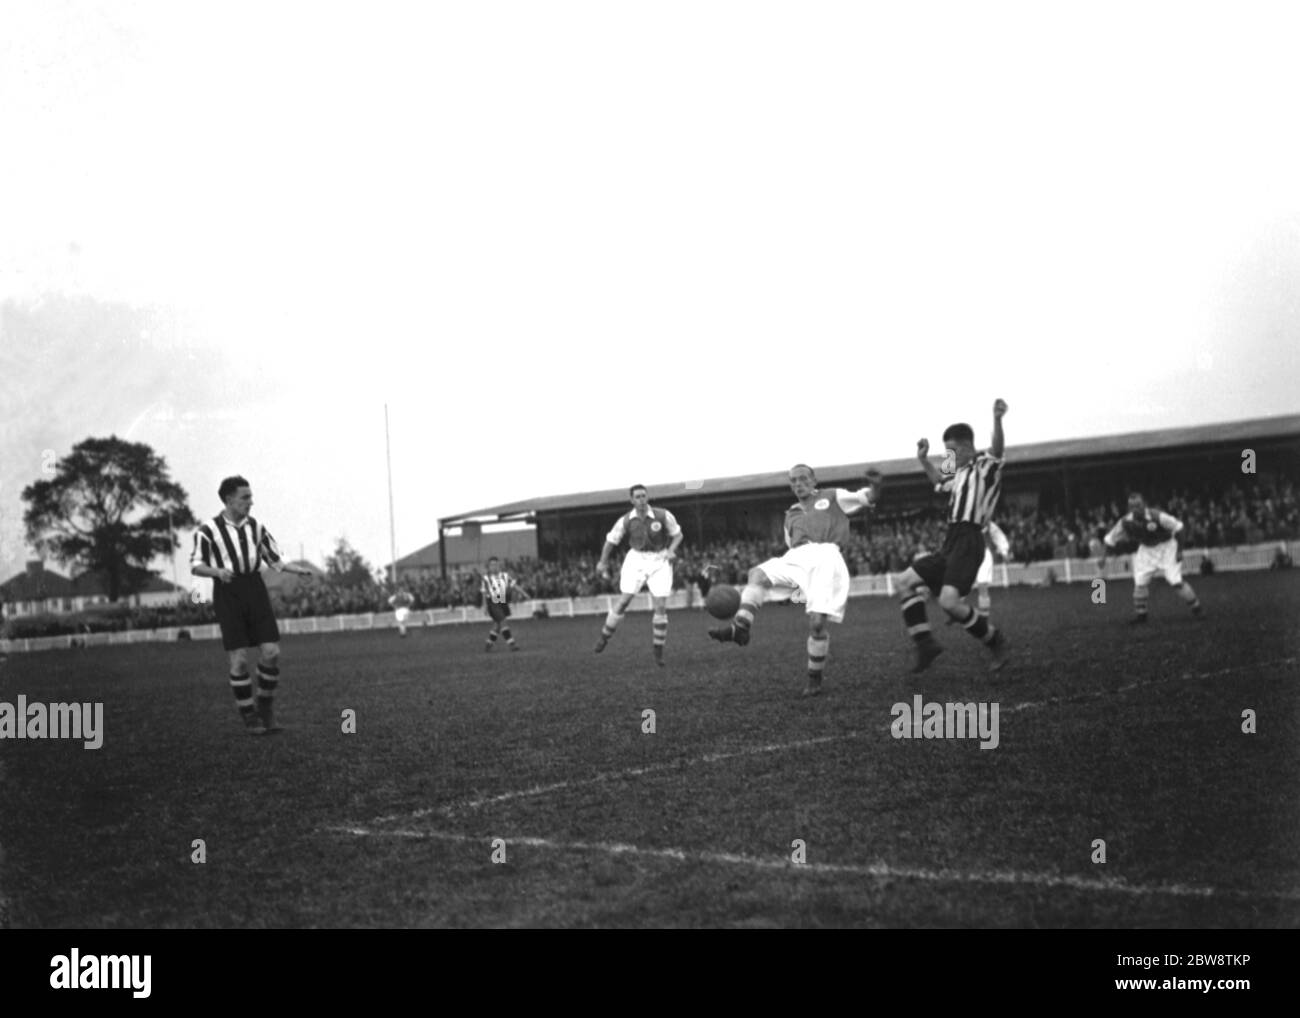 Dartford vs. Ipswich Town - Southern League - 24/10/36 Two players compete for the ball in the box . 1936 Stock Photo